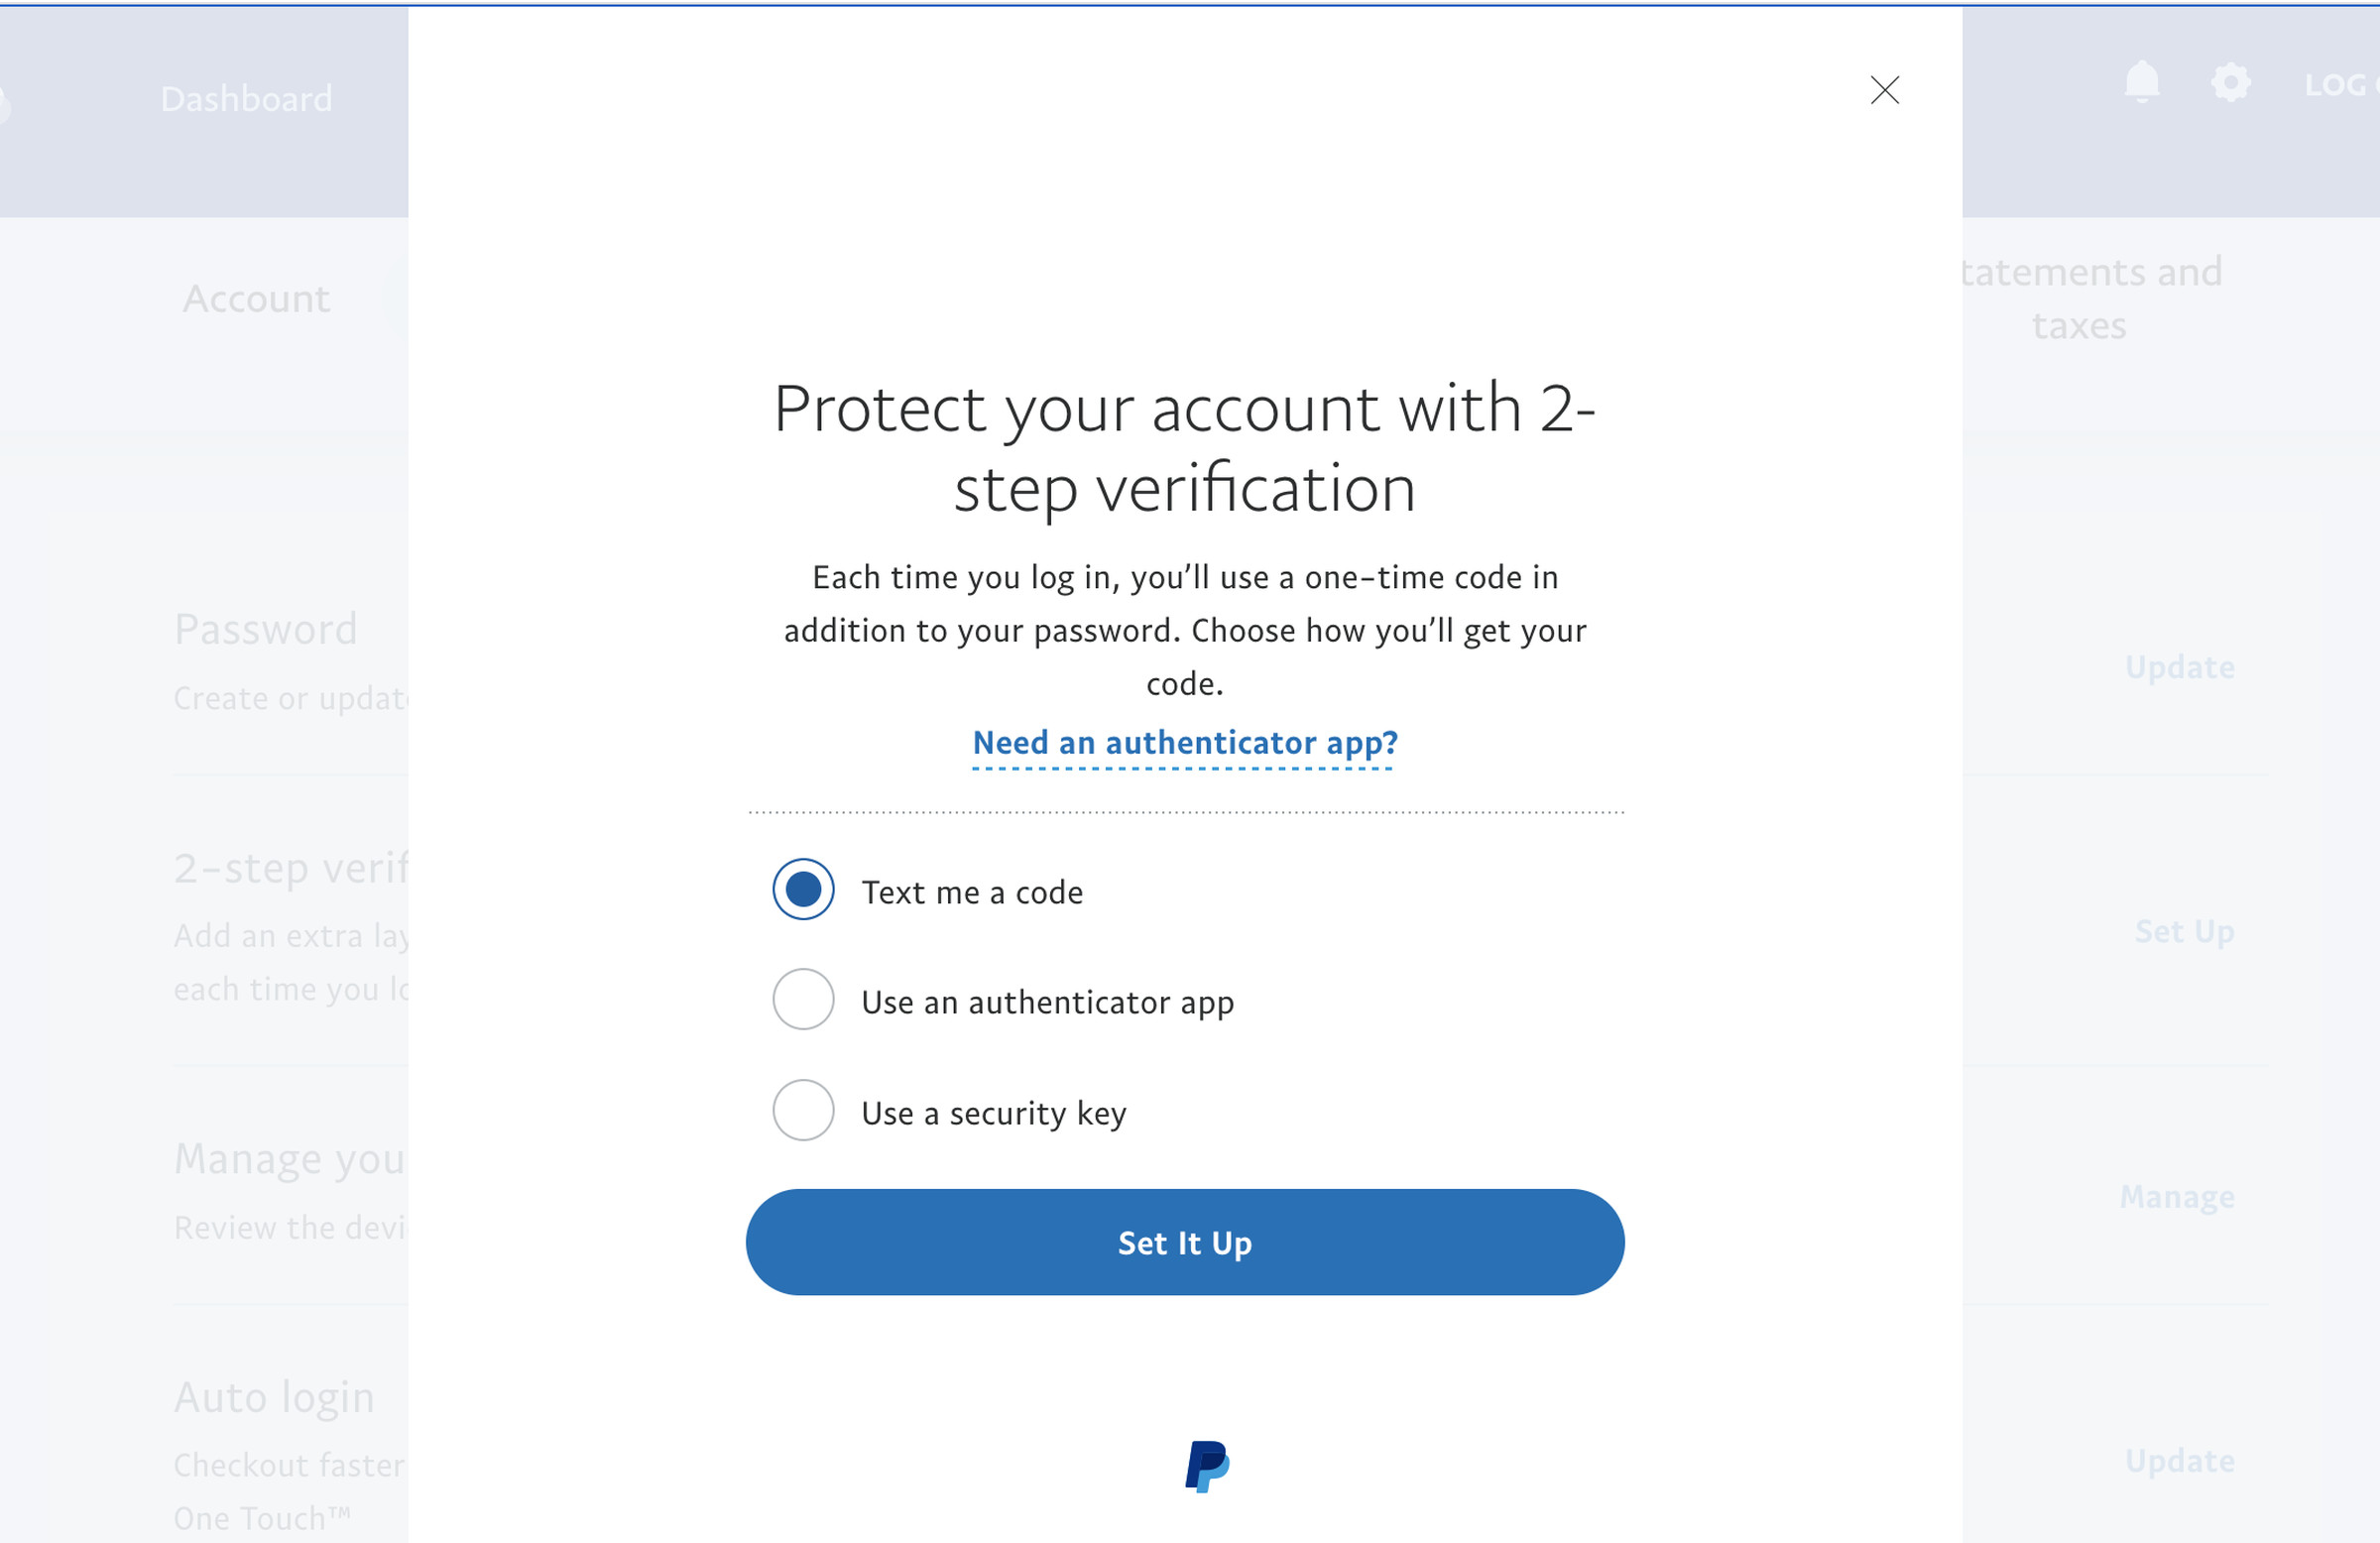 Page headed “Protect your account with 2-step verification” and then checkboxes for a code texted to you, an authenticator app, or a security key.